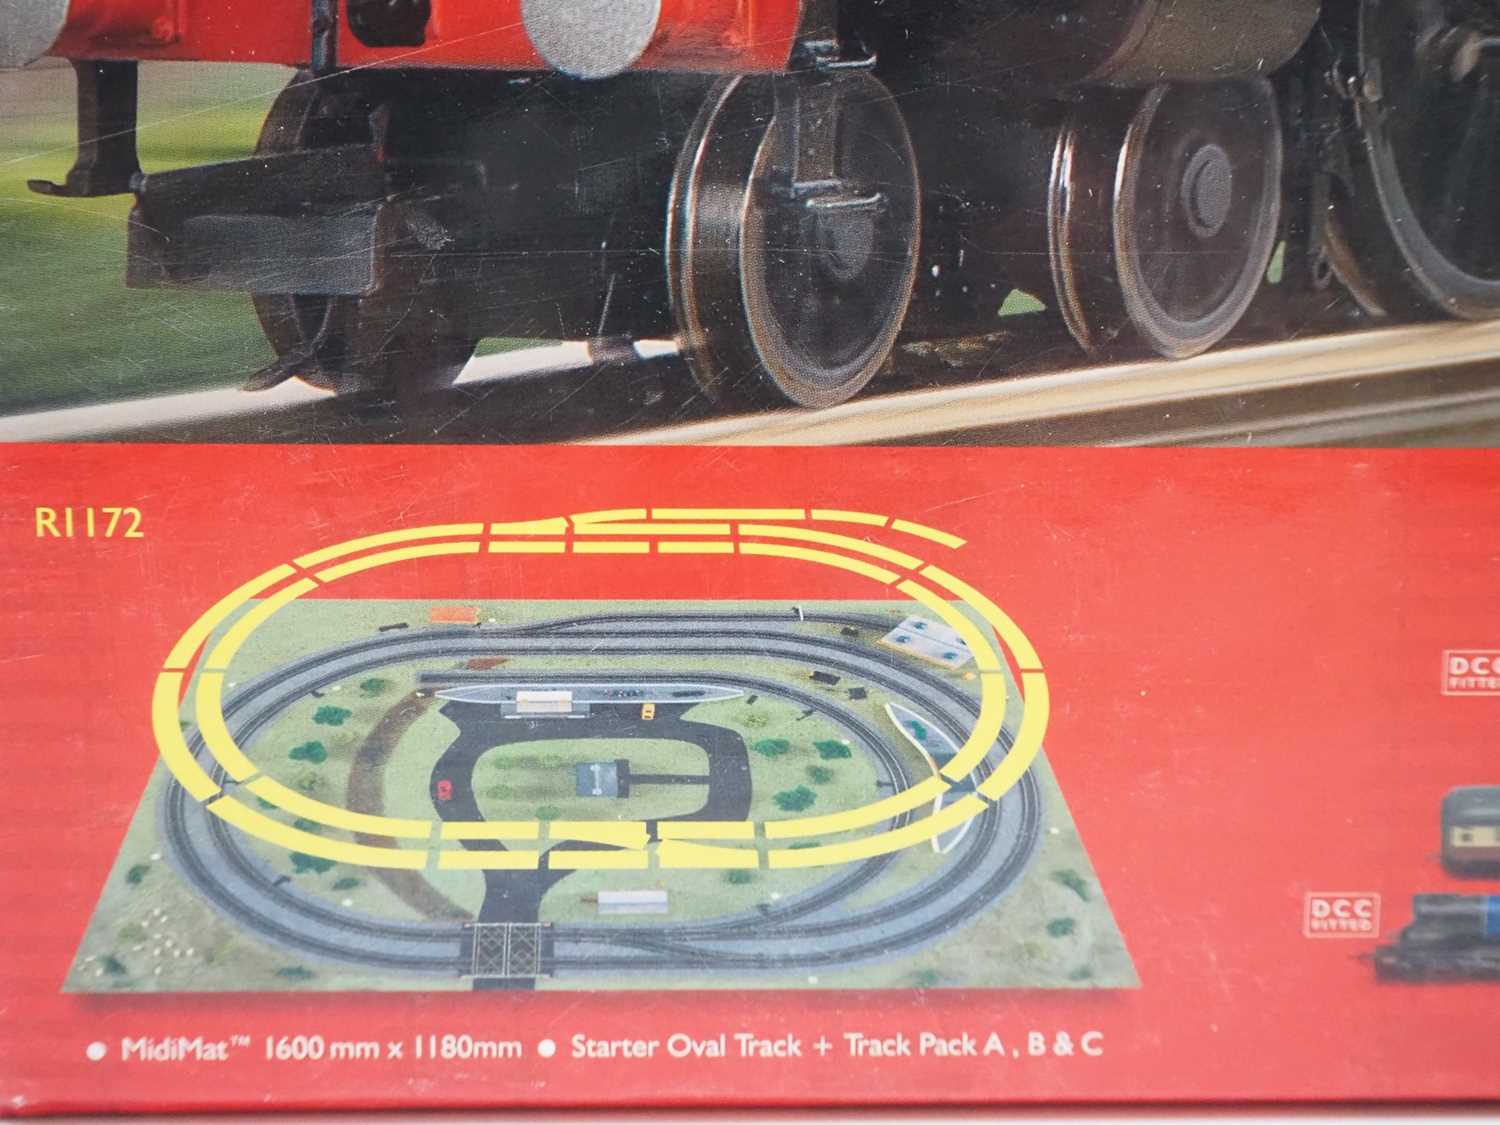 A HORNBY OO gauge R1172 'The Majestic' digital train set, missing diesel loco but otherwise complete - Image 4 of 4